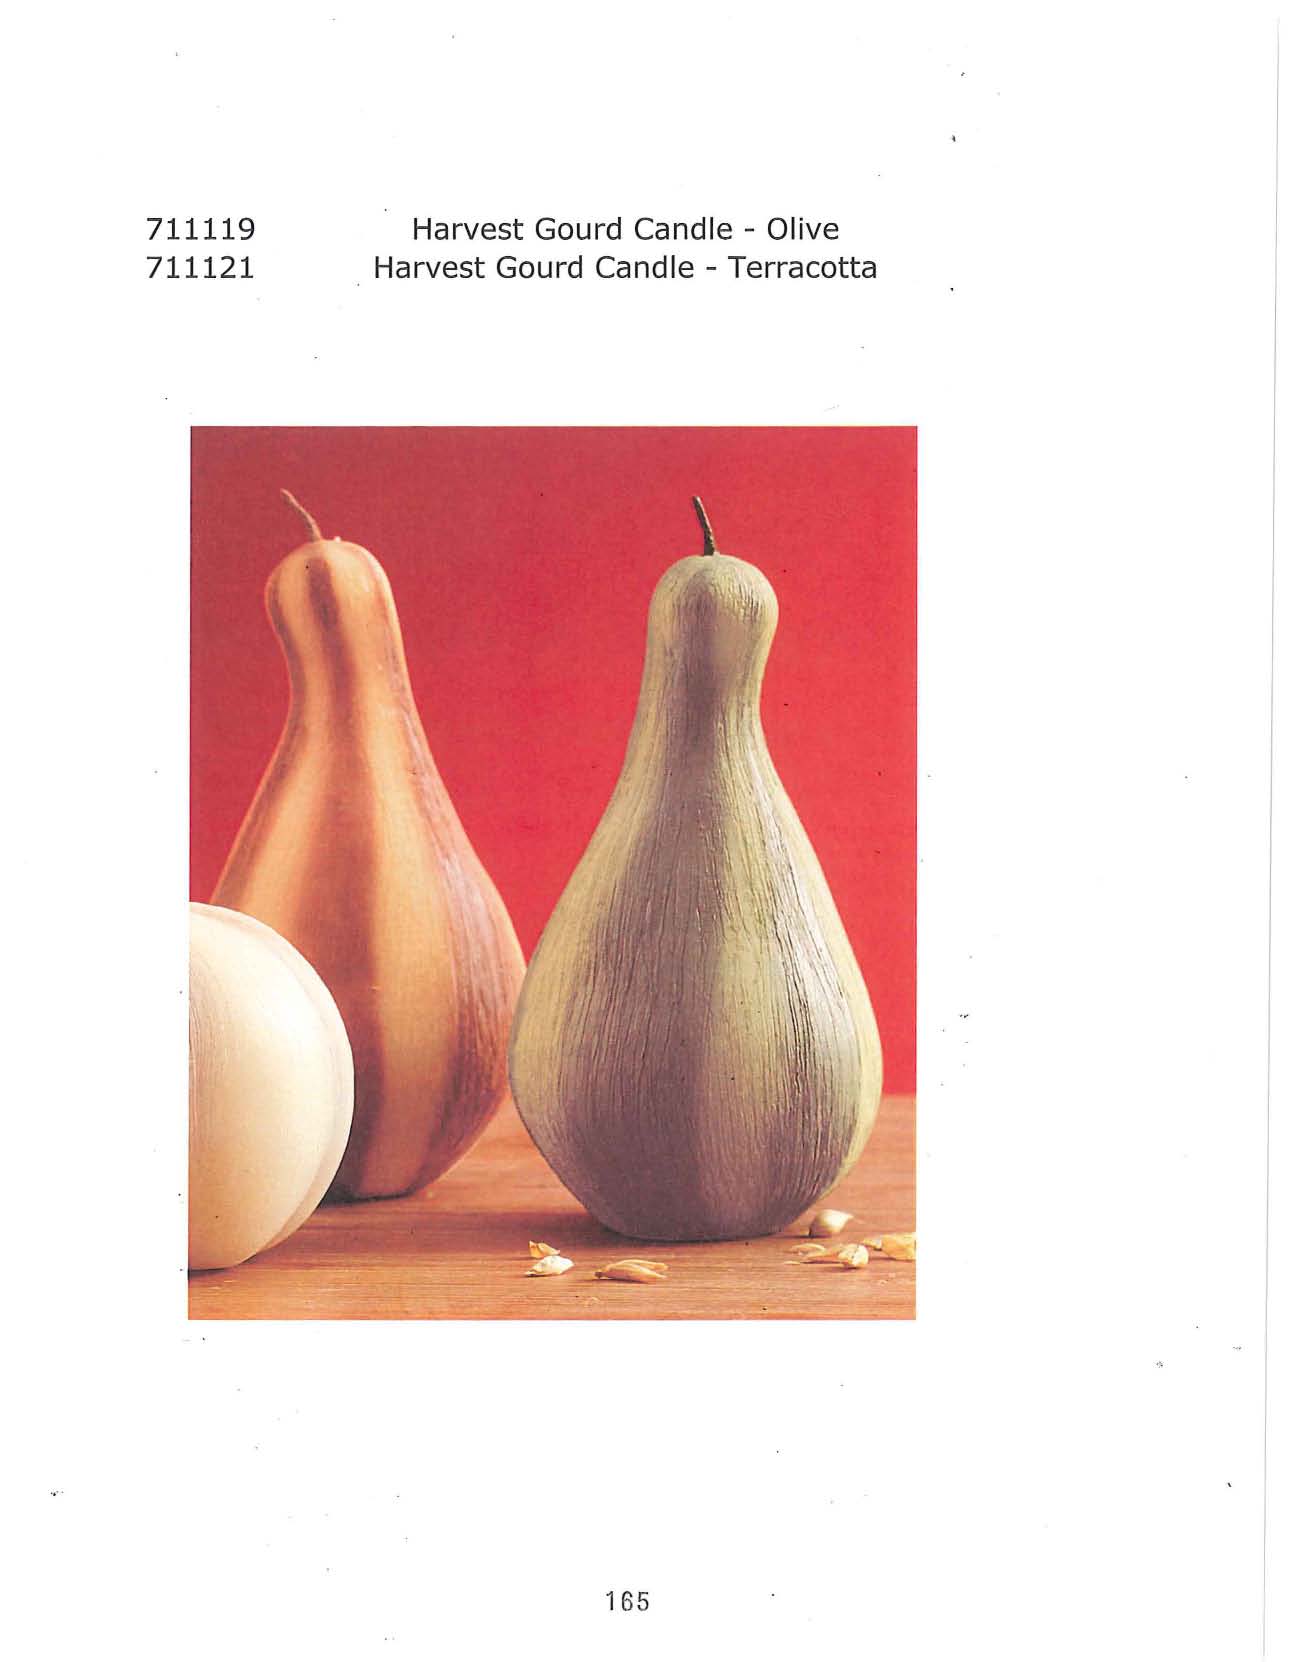 Harvest Gourd Candle - Olive and Terracotta